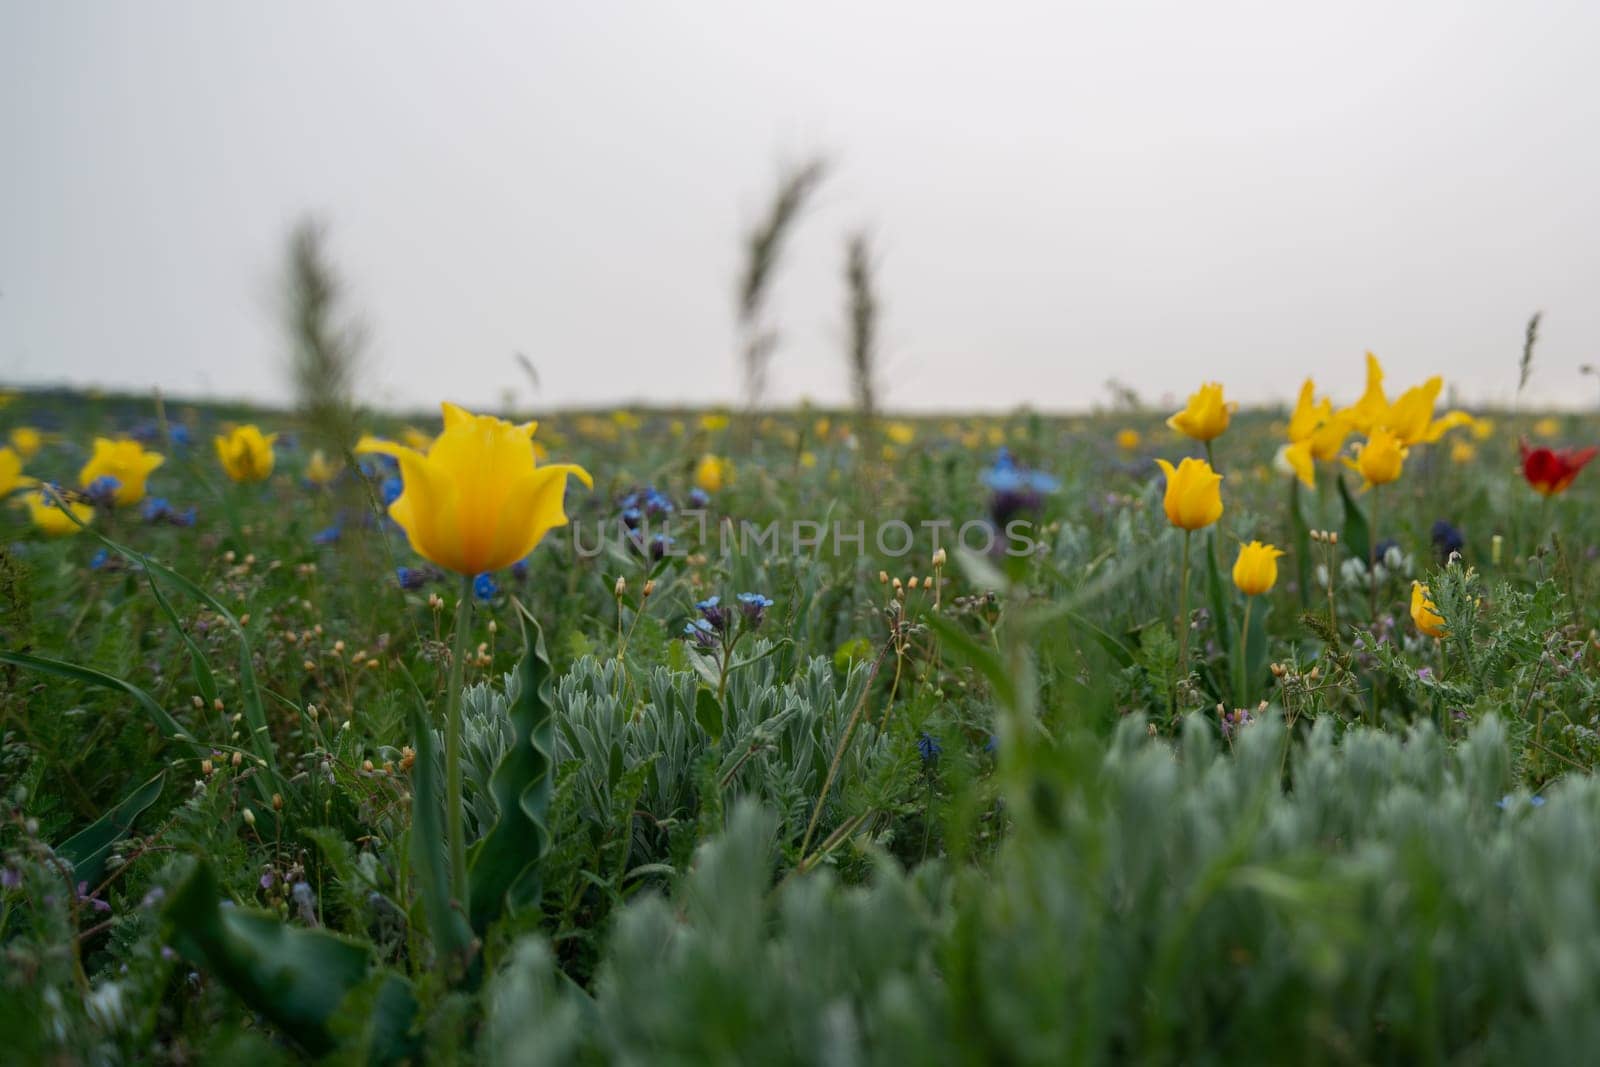 A field of yellow flowers with some blue flowers in the background